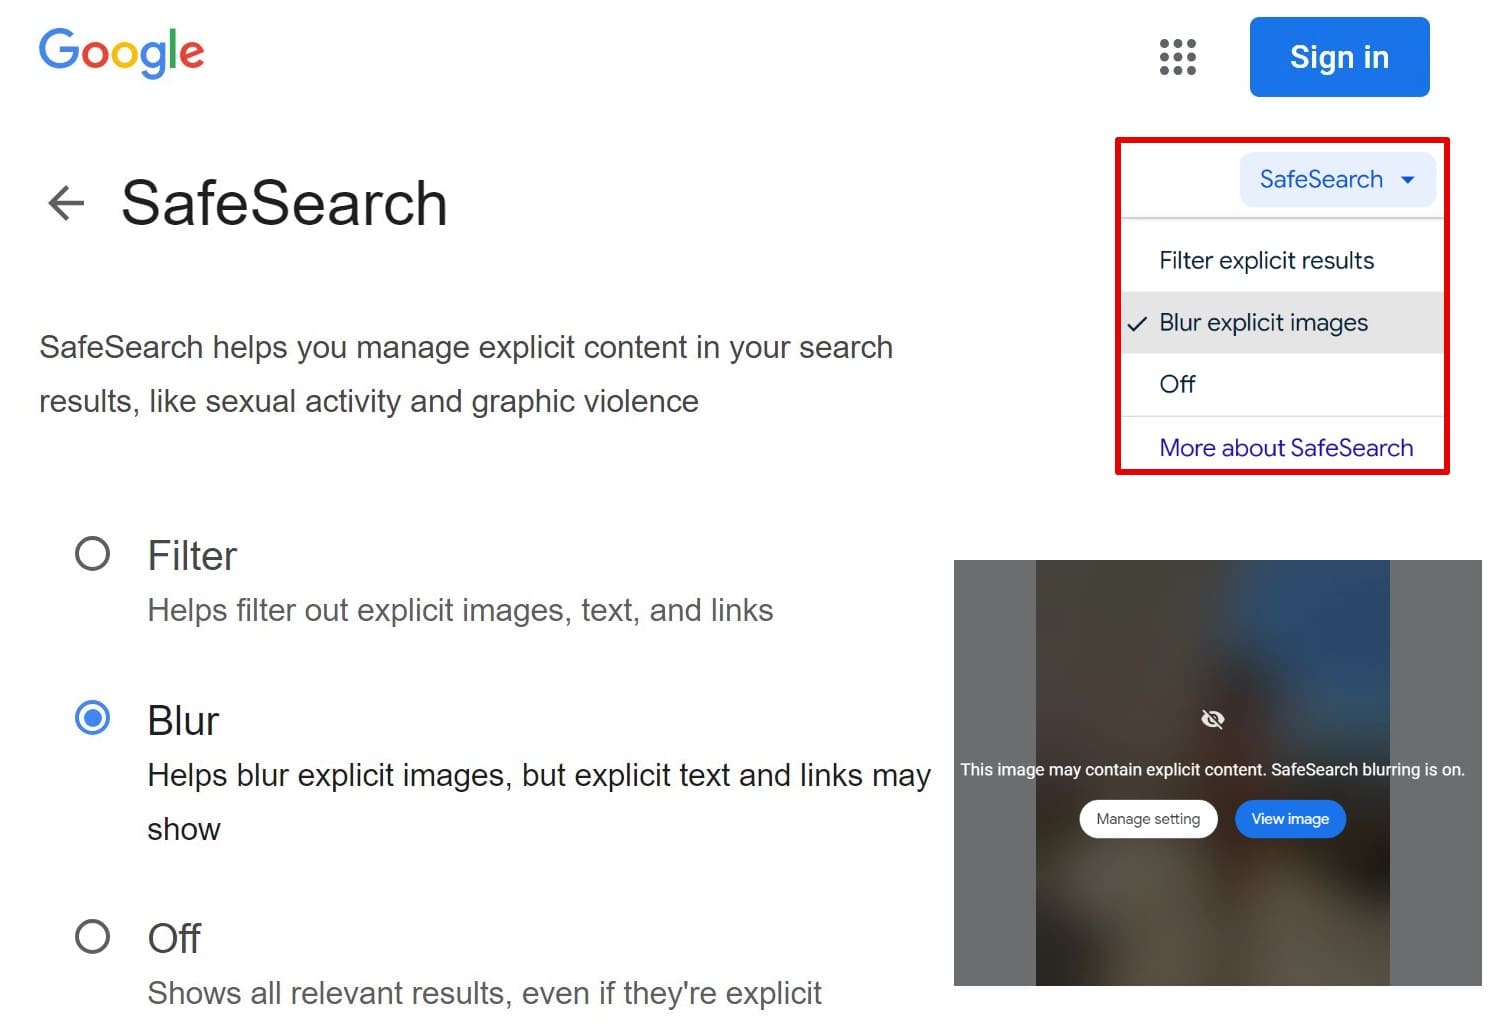 A screenshot showing Google's SafeSearch settings page with options to filter and blur explicit content